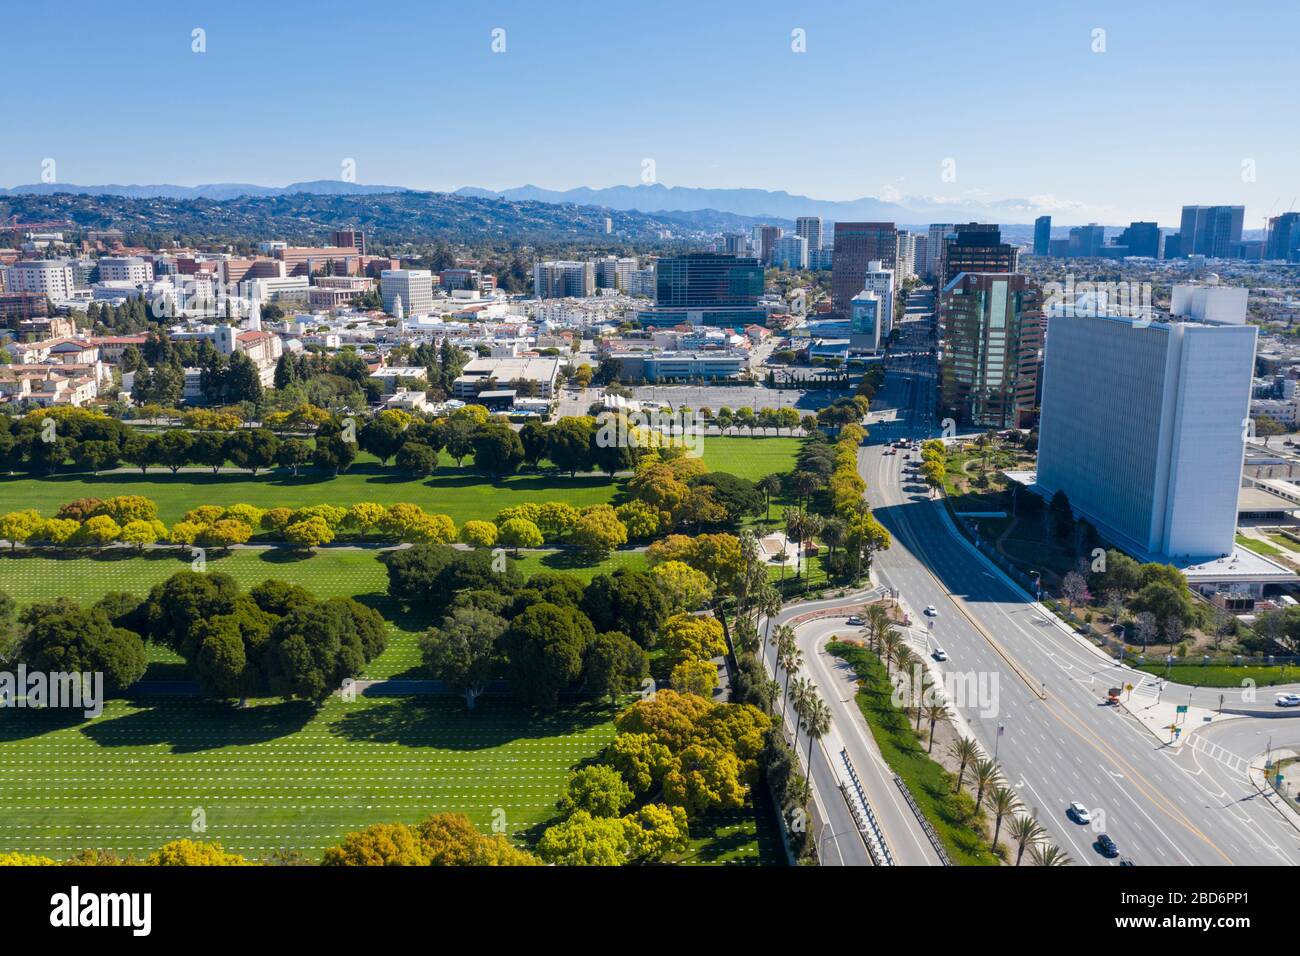 Aerial view of Wilshire Blvd with the Federal Building in the foreground, Westwood, Los Angeles Stock Photo